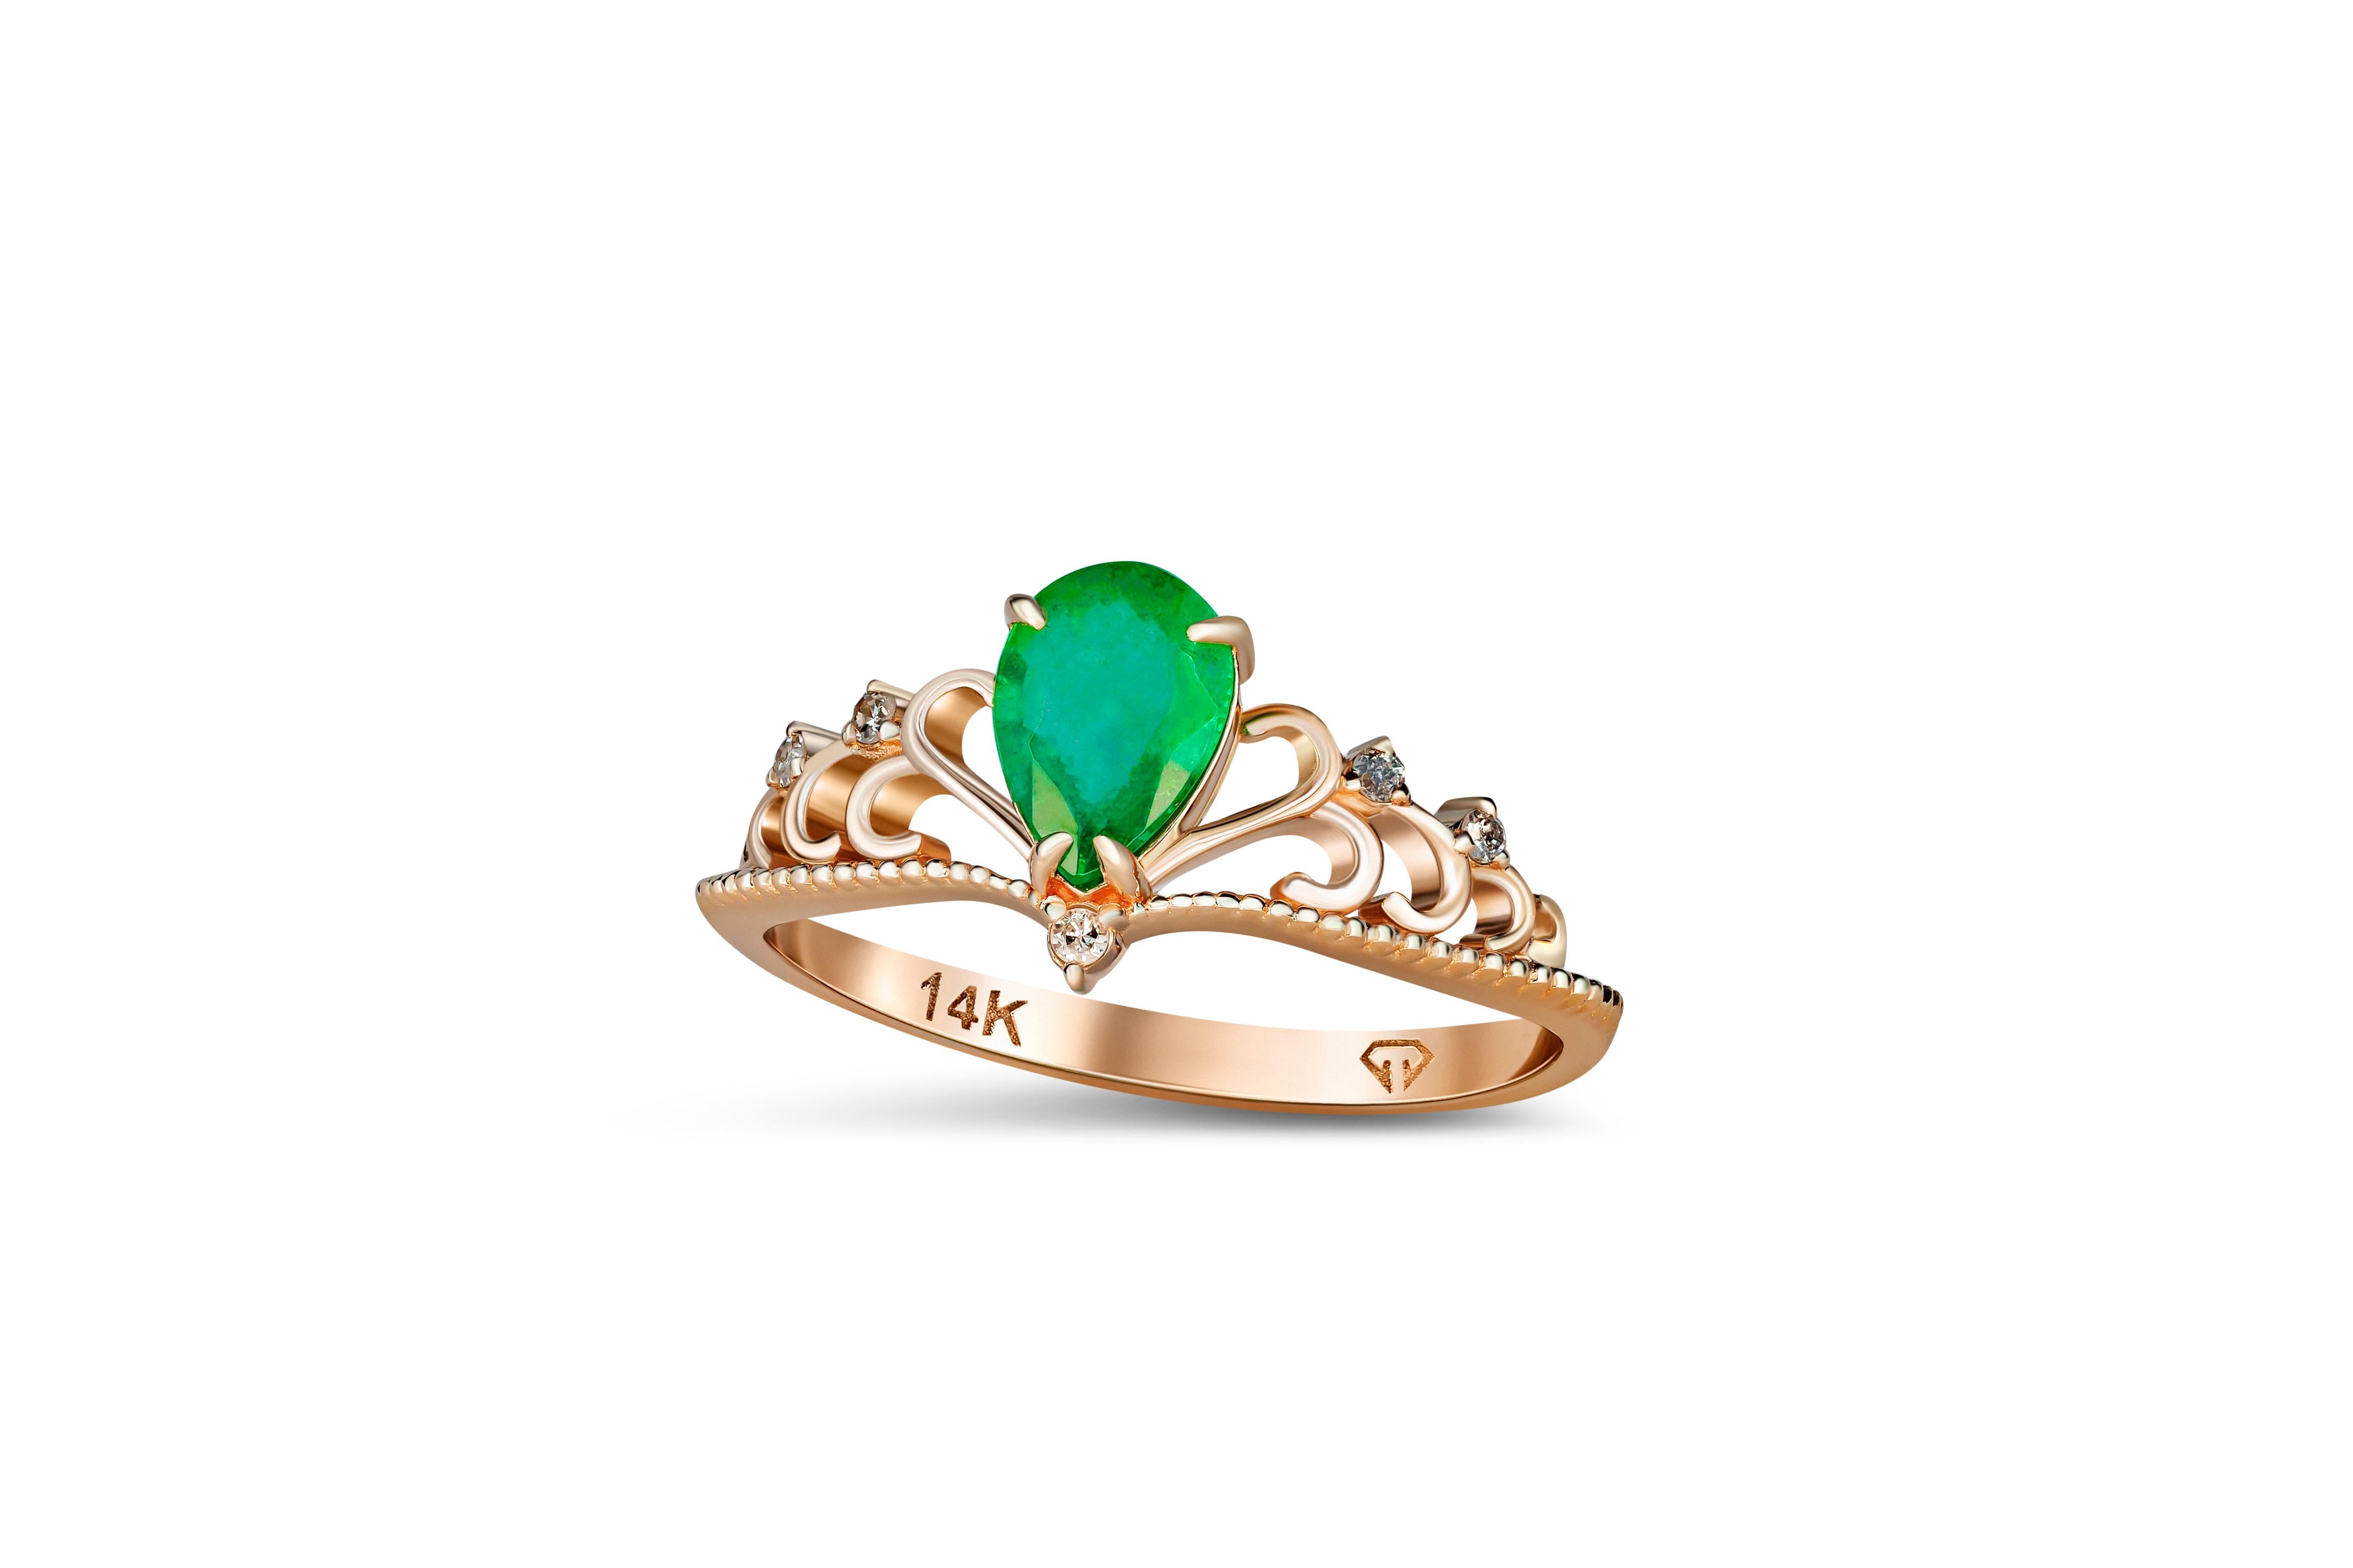 Pear emerald ring. 

14k gold ring with Emerald and diamonds. Tiara emerald ring. Emerald Crown Ring. Engagement ring. May Birthstone Ring.

Metal: 14k gold
Weight: 2 g. depends from size.

Central stone: Emerald
Cut: Pear
Weight: aprx 1 ct.
Color: